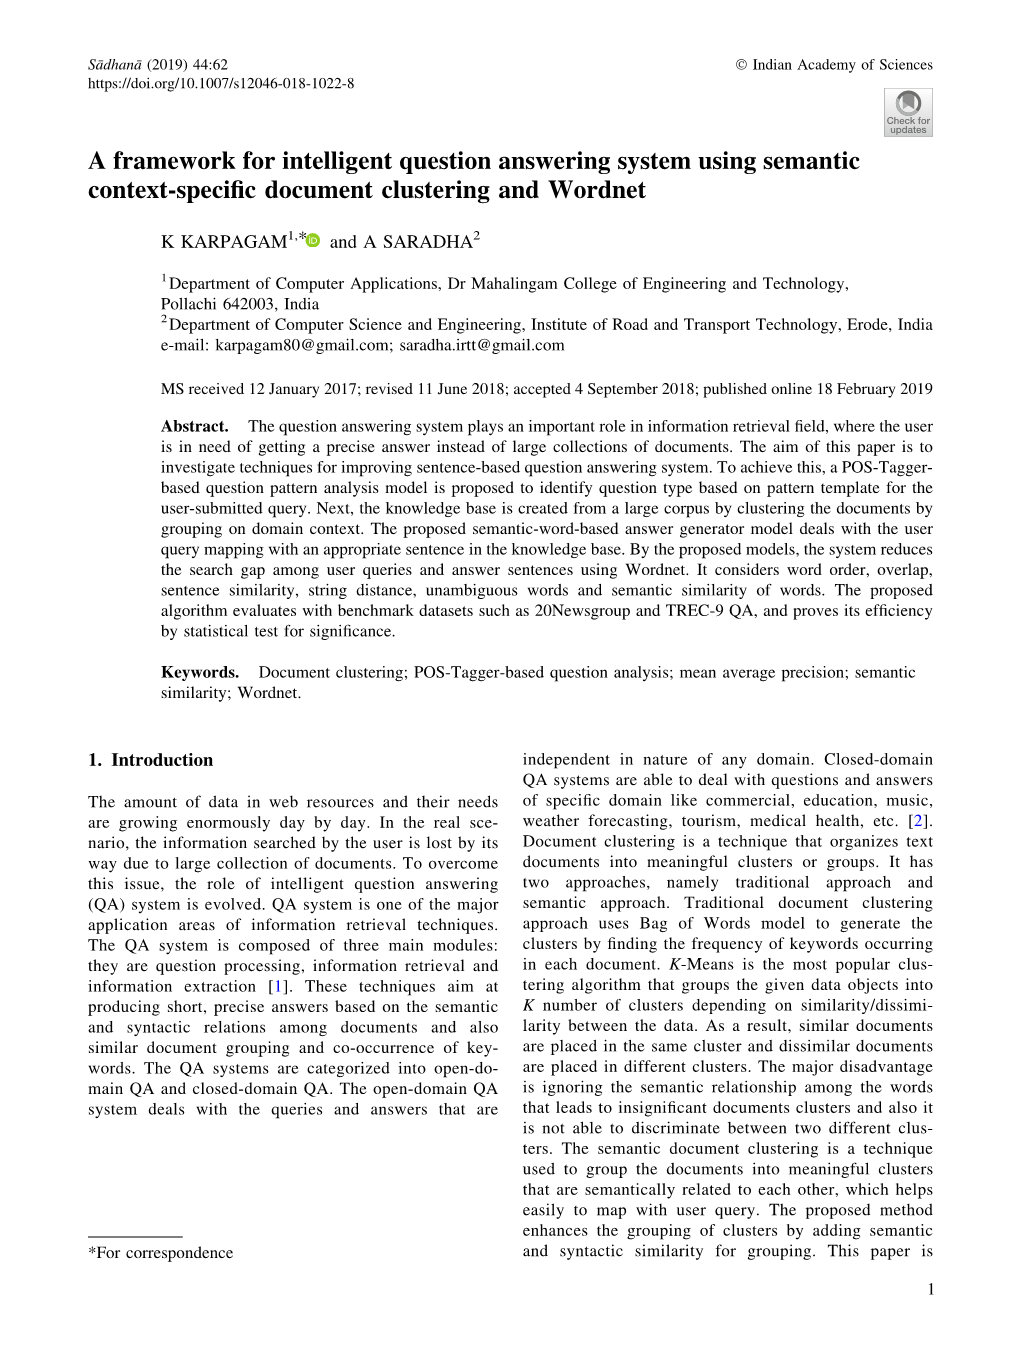 A Framework for Intelligent Question Answering System Using Semantic Context-Speciﬁc Document Clustering and Wordnet